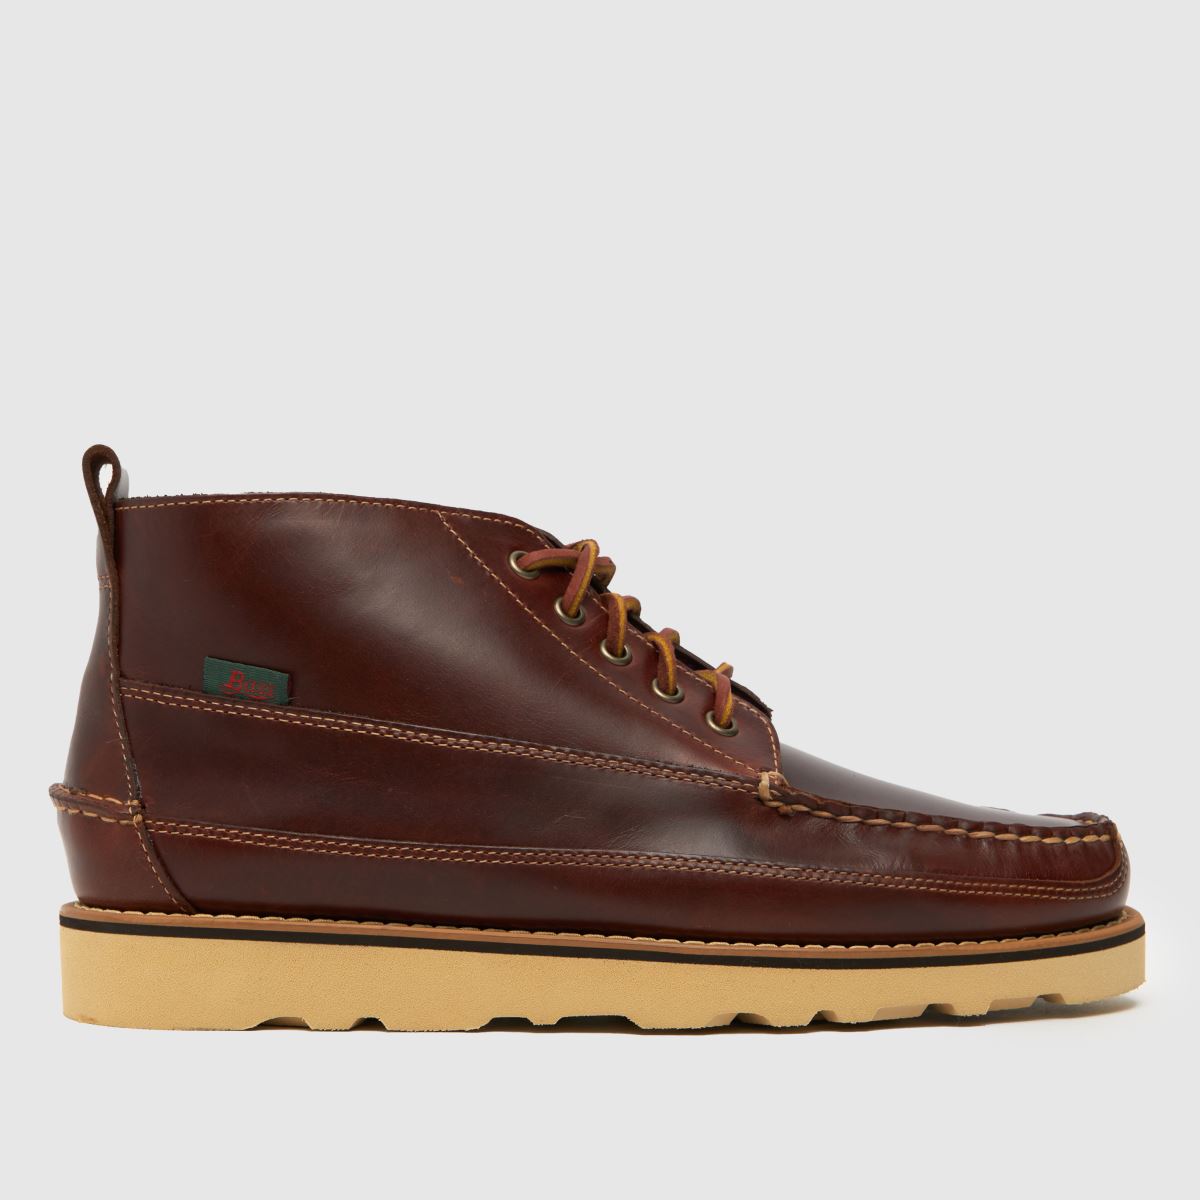 G.H. BASS camp moc ii boots in brown